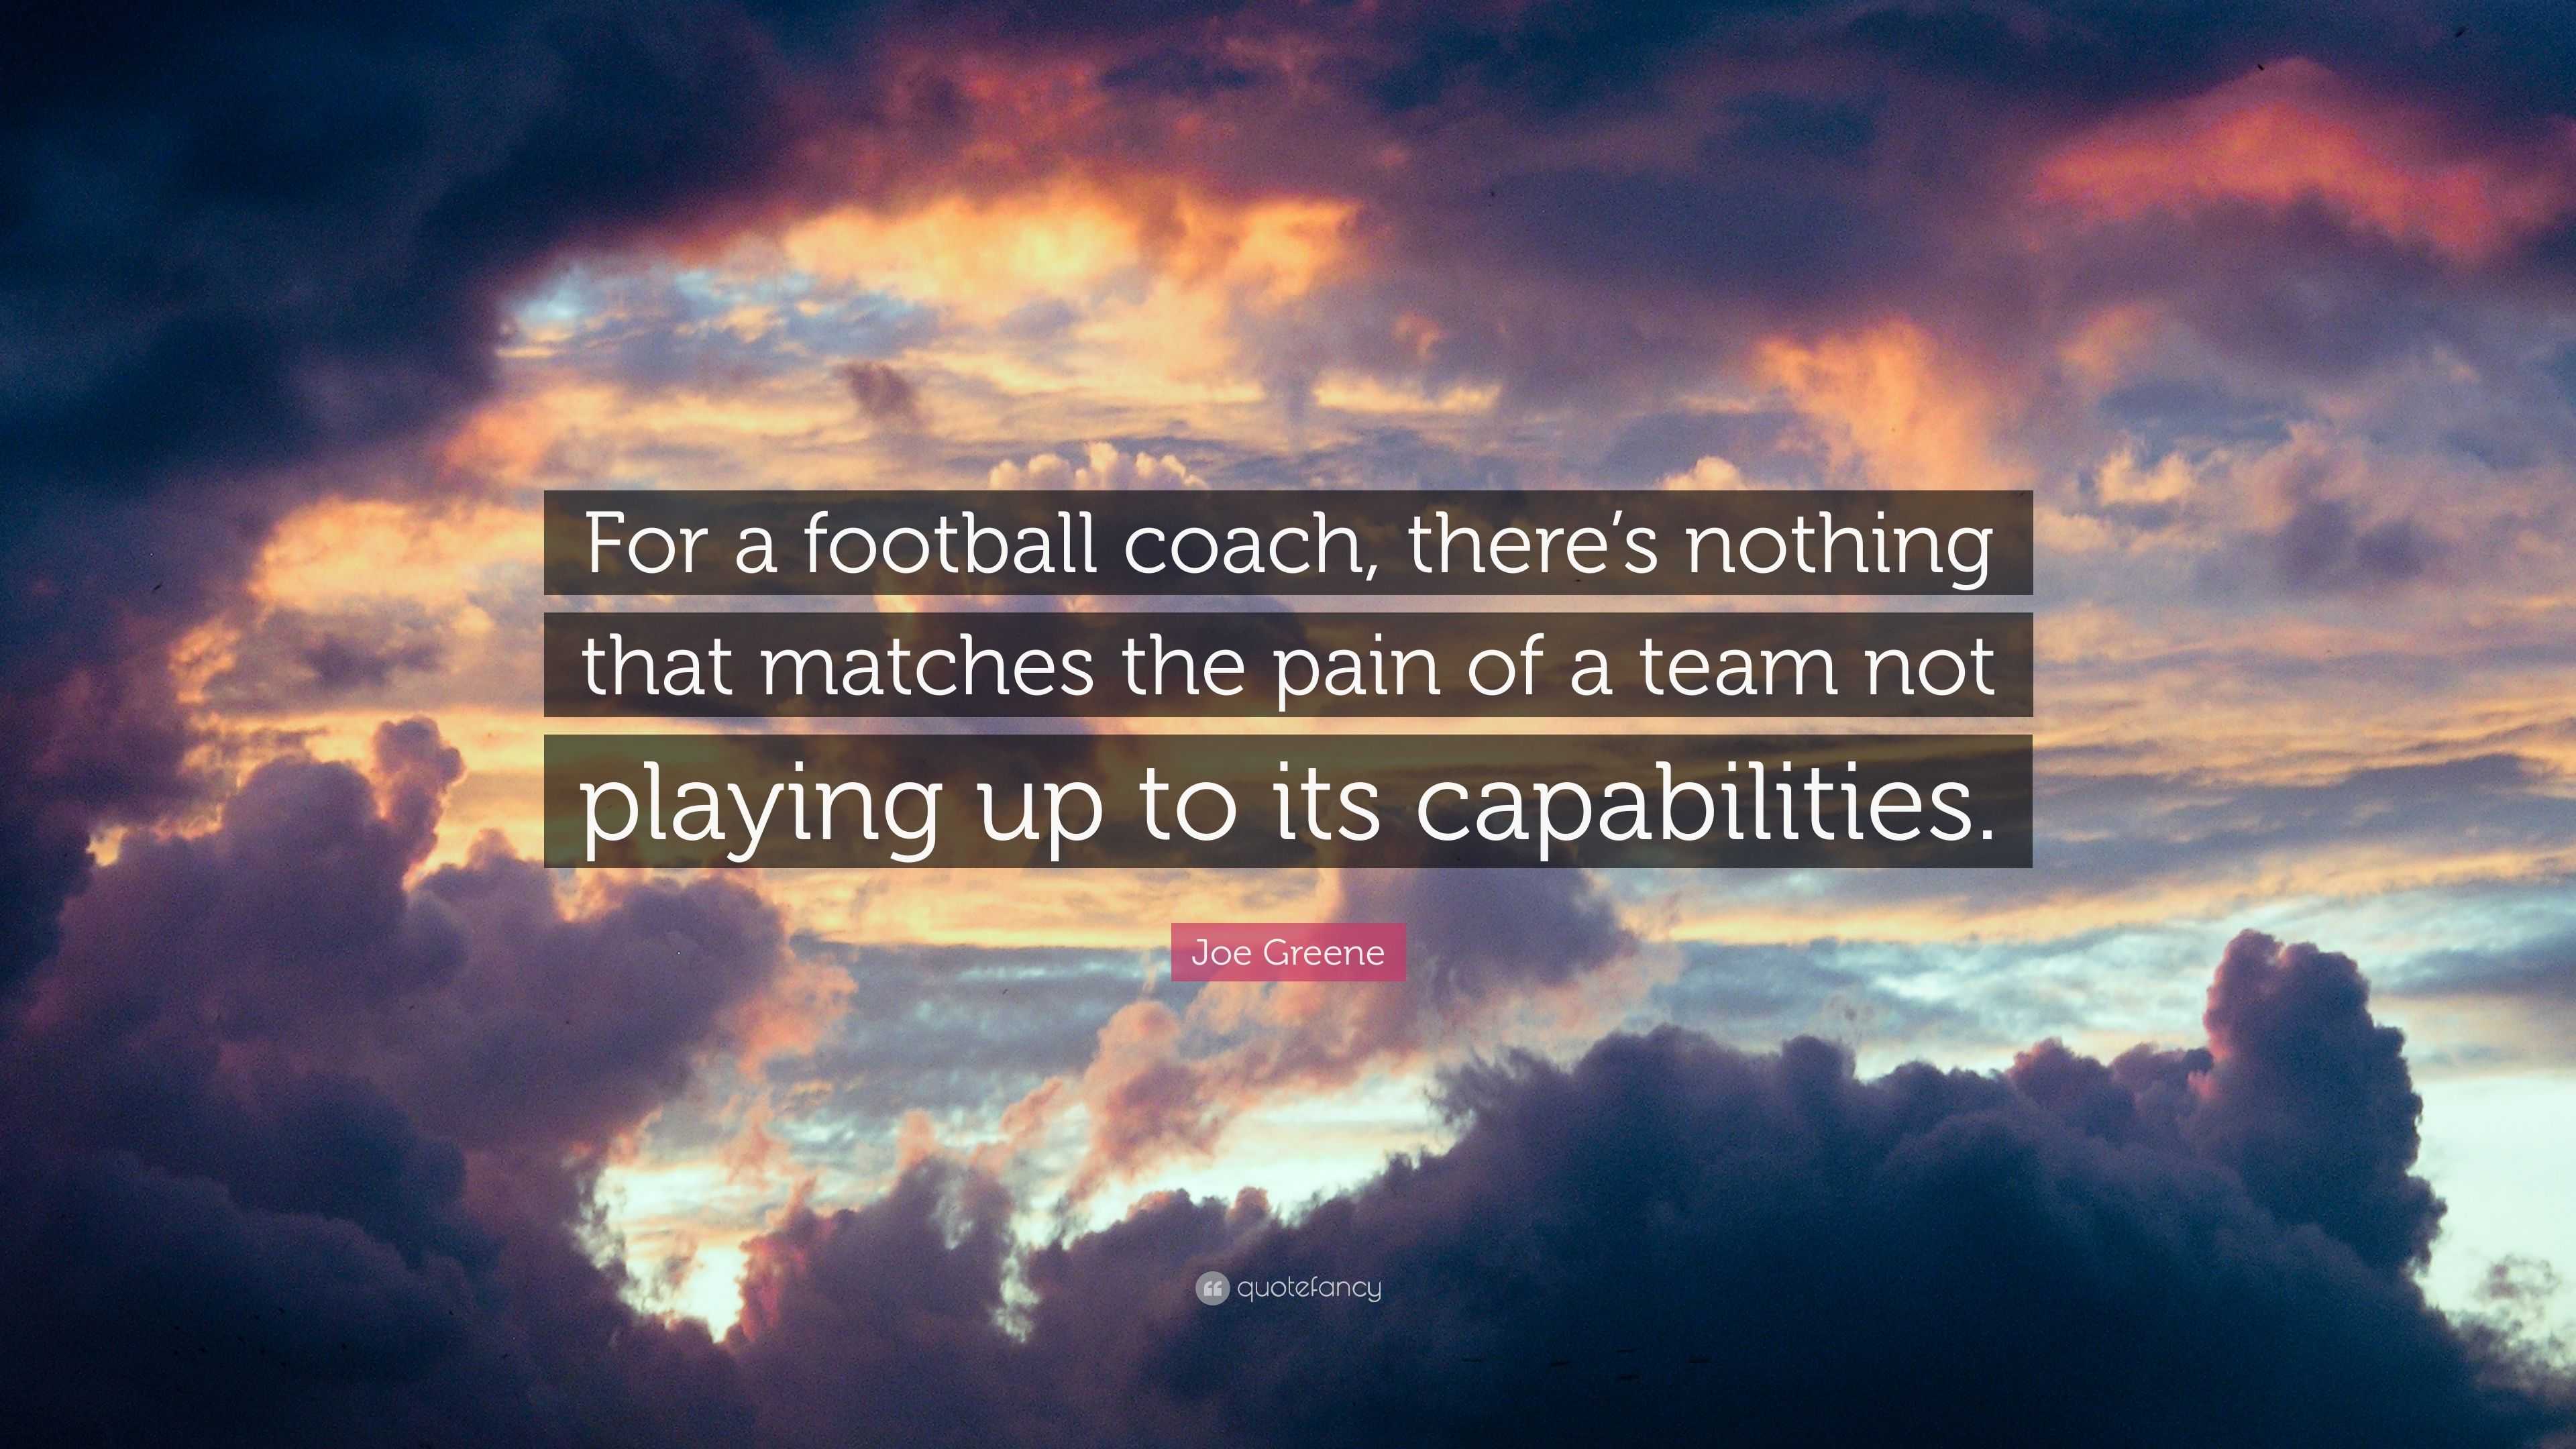 Joe Greene Quote: “For a football coach, there's nothing that matches the  pain of a team